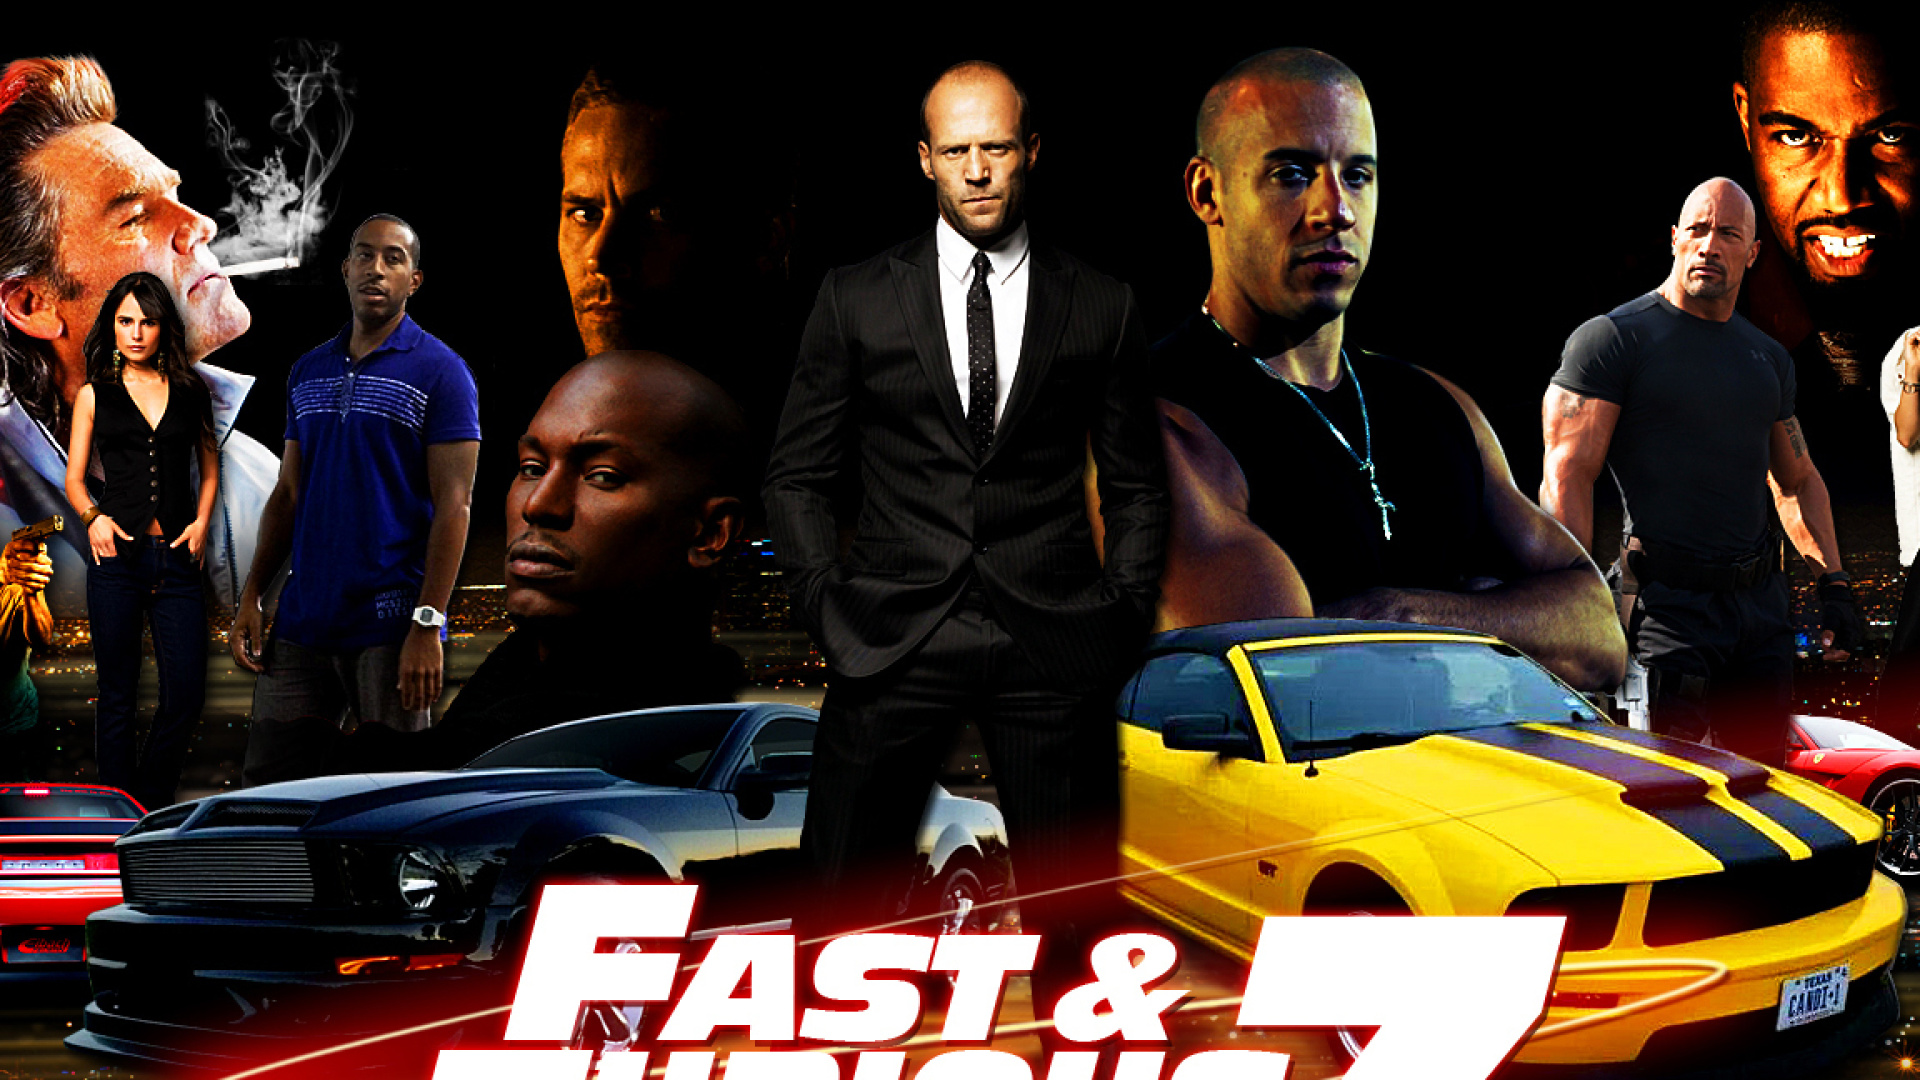 download fast and furious 7 full movie hd